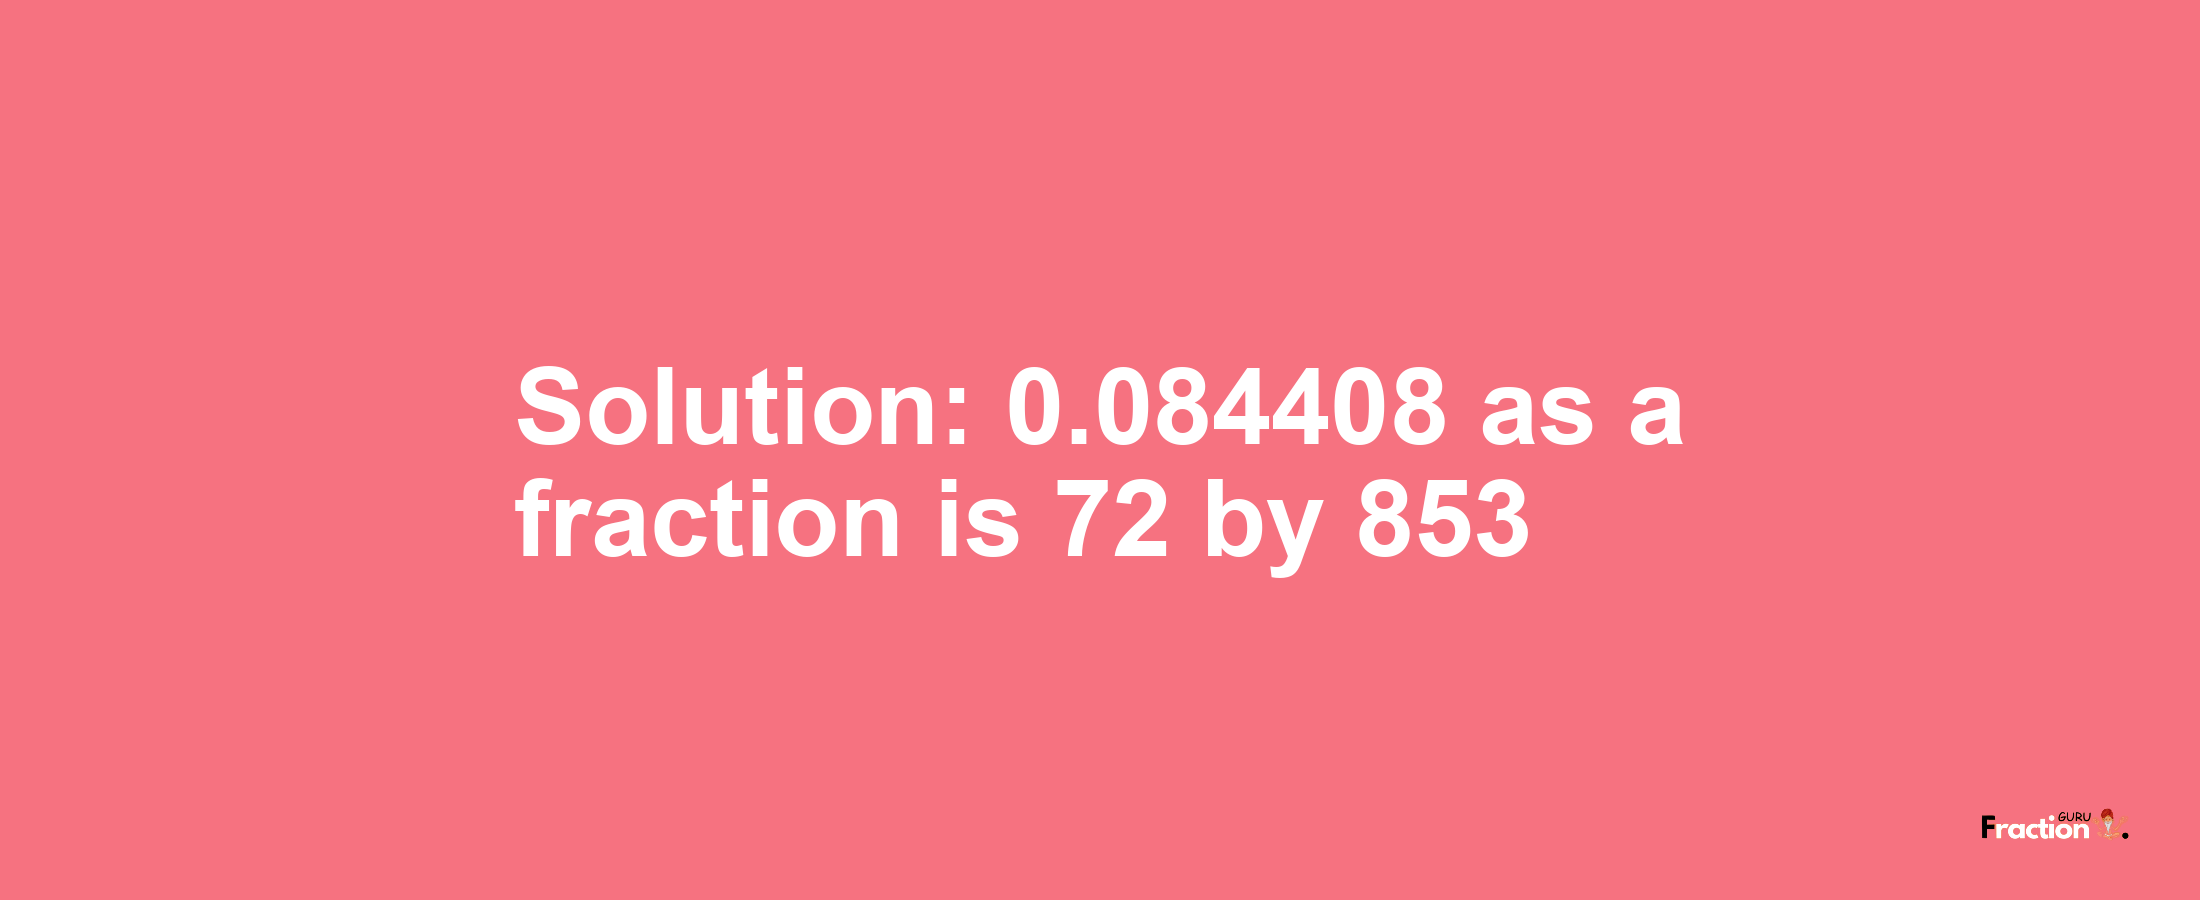 Solution:0.084408 as a fraction is 72/853